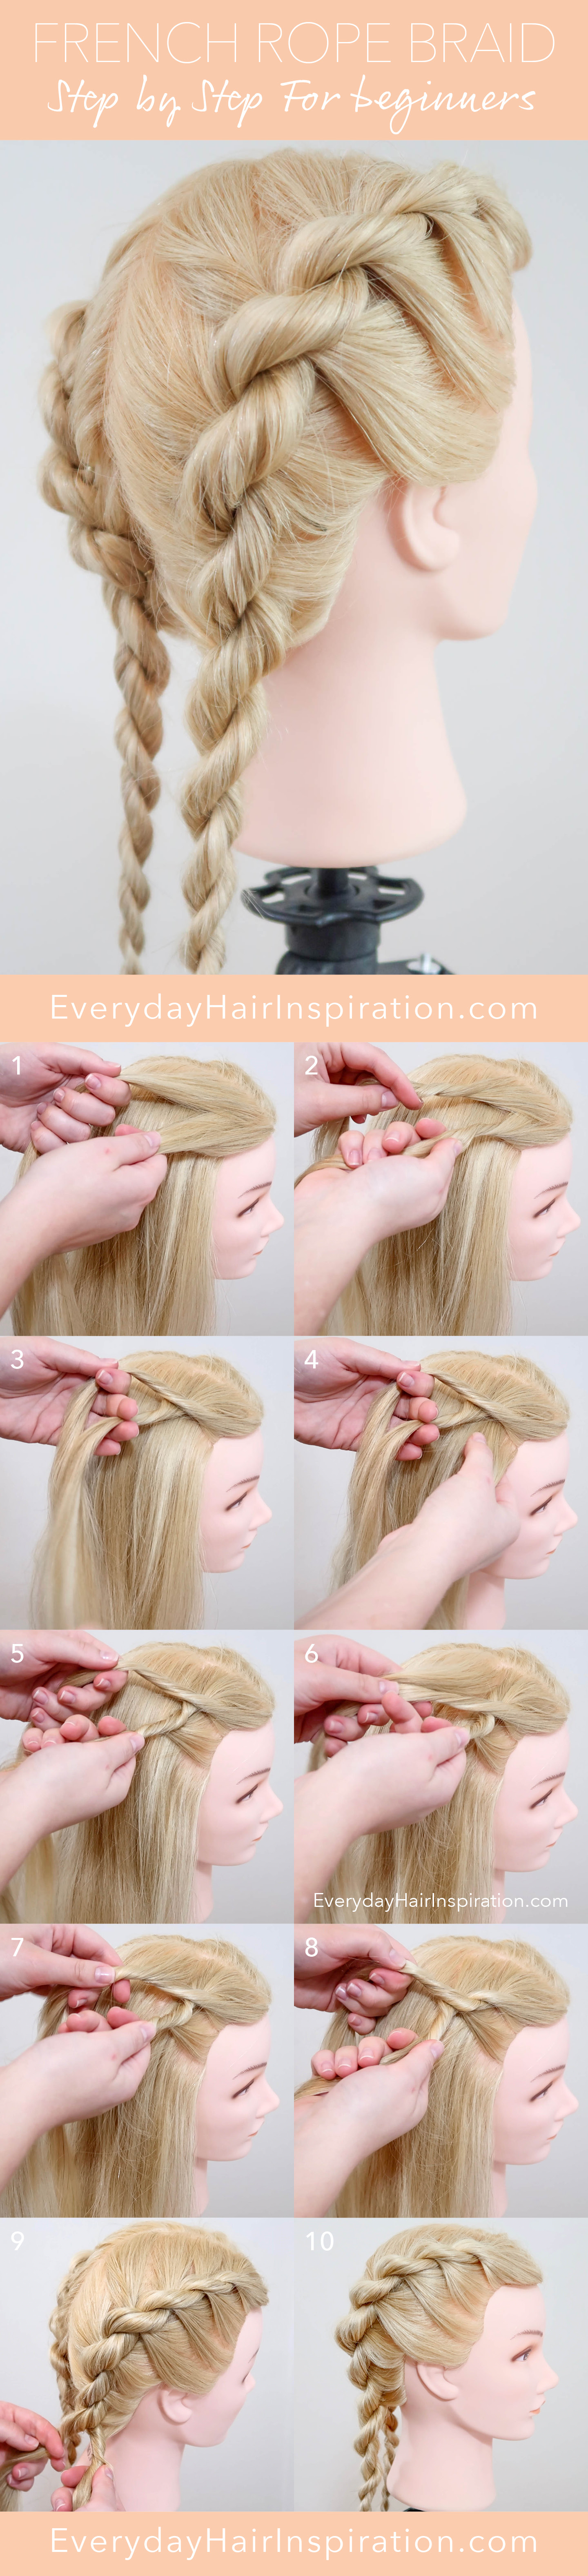 How To French Braid Step by Step For Beginners - Full Talk Through